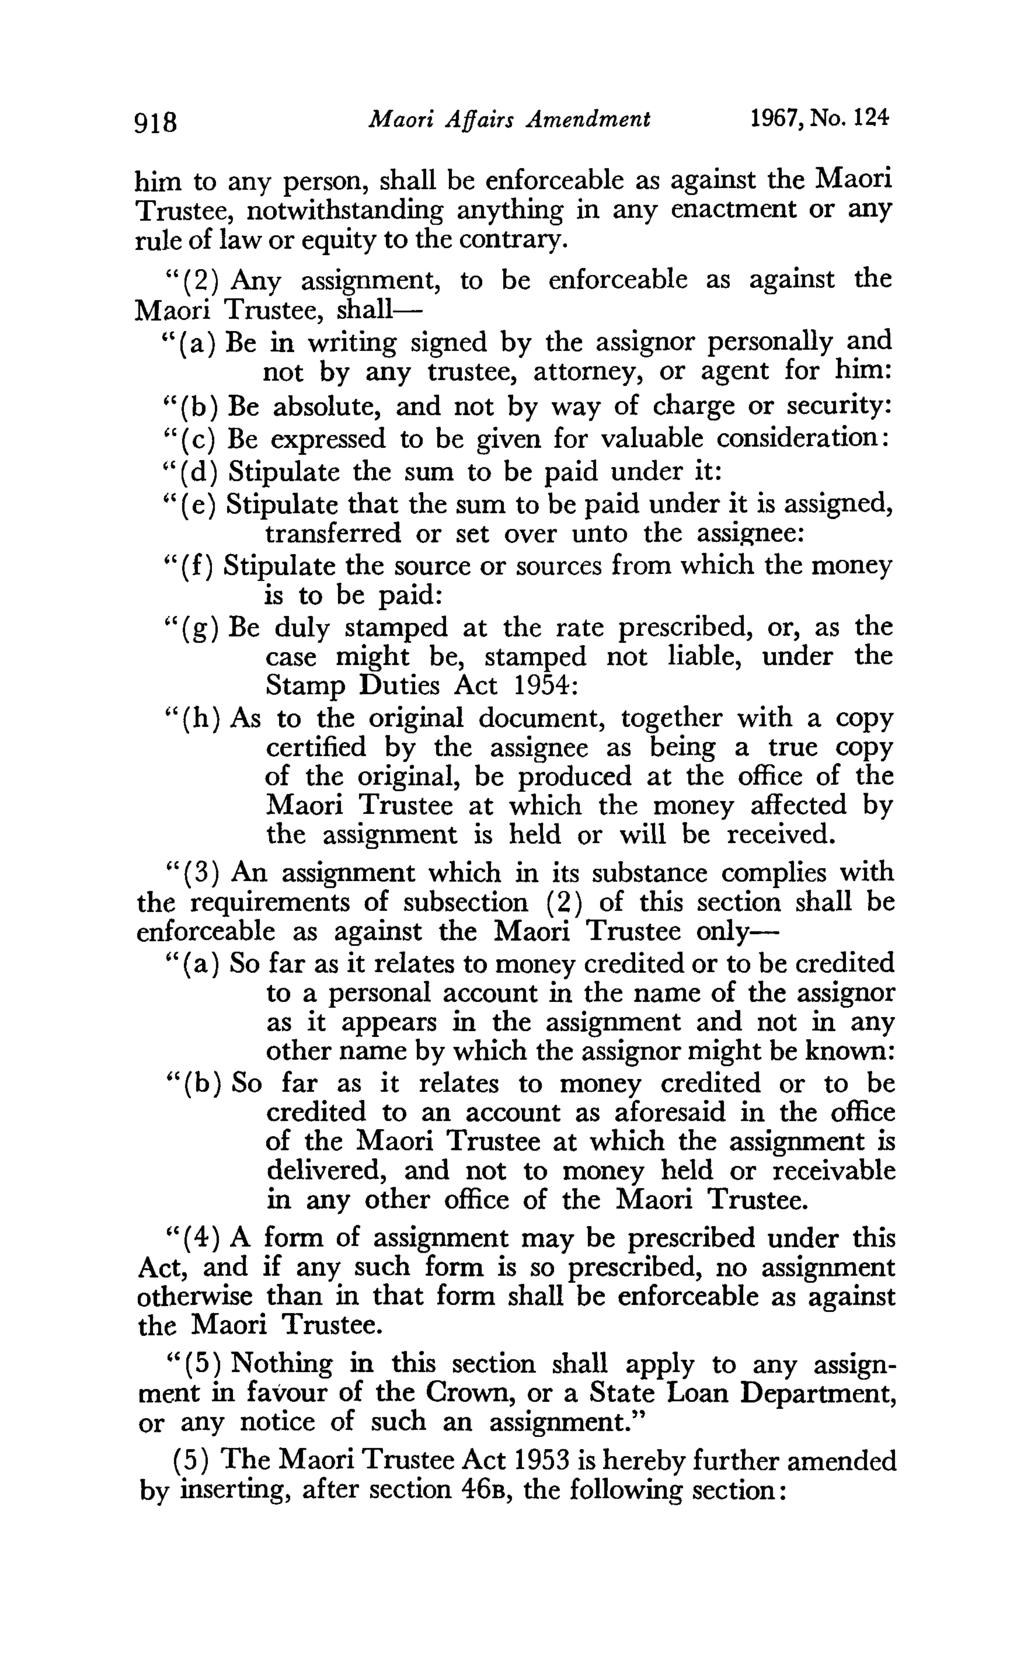 918 Maori Affairs Amendment 1967, No. 124 him to any person, shall be enforceable as against the Maori Trustee, notwithstanding anything in any enactment or any rule of law or equity to the contrary.